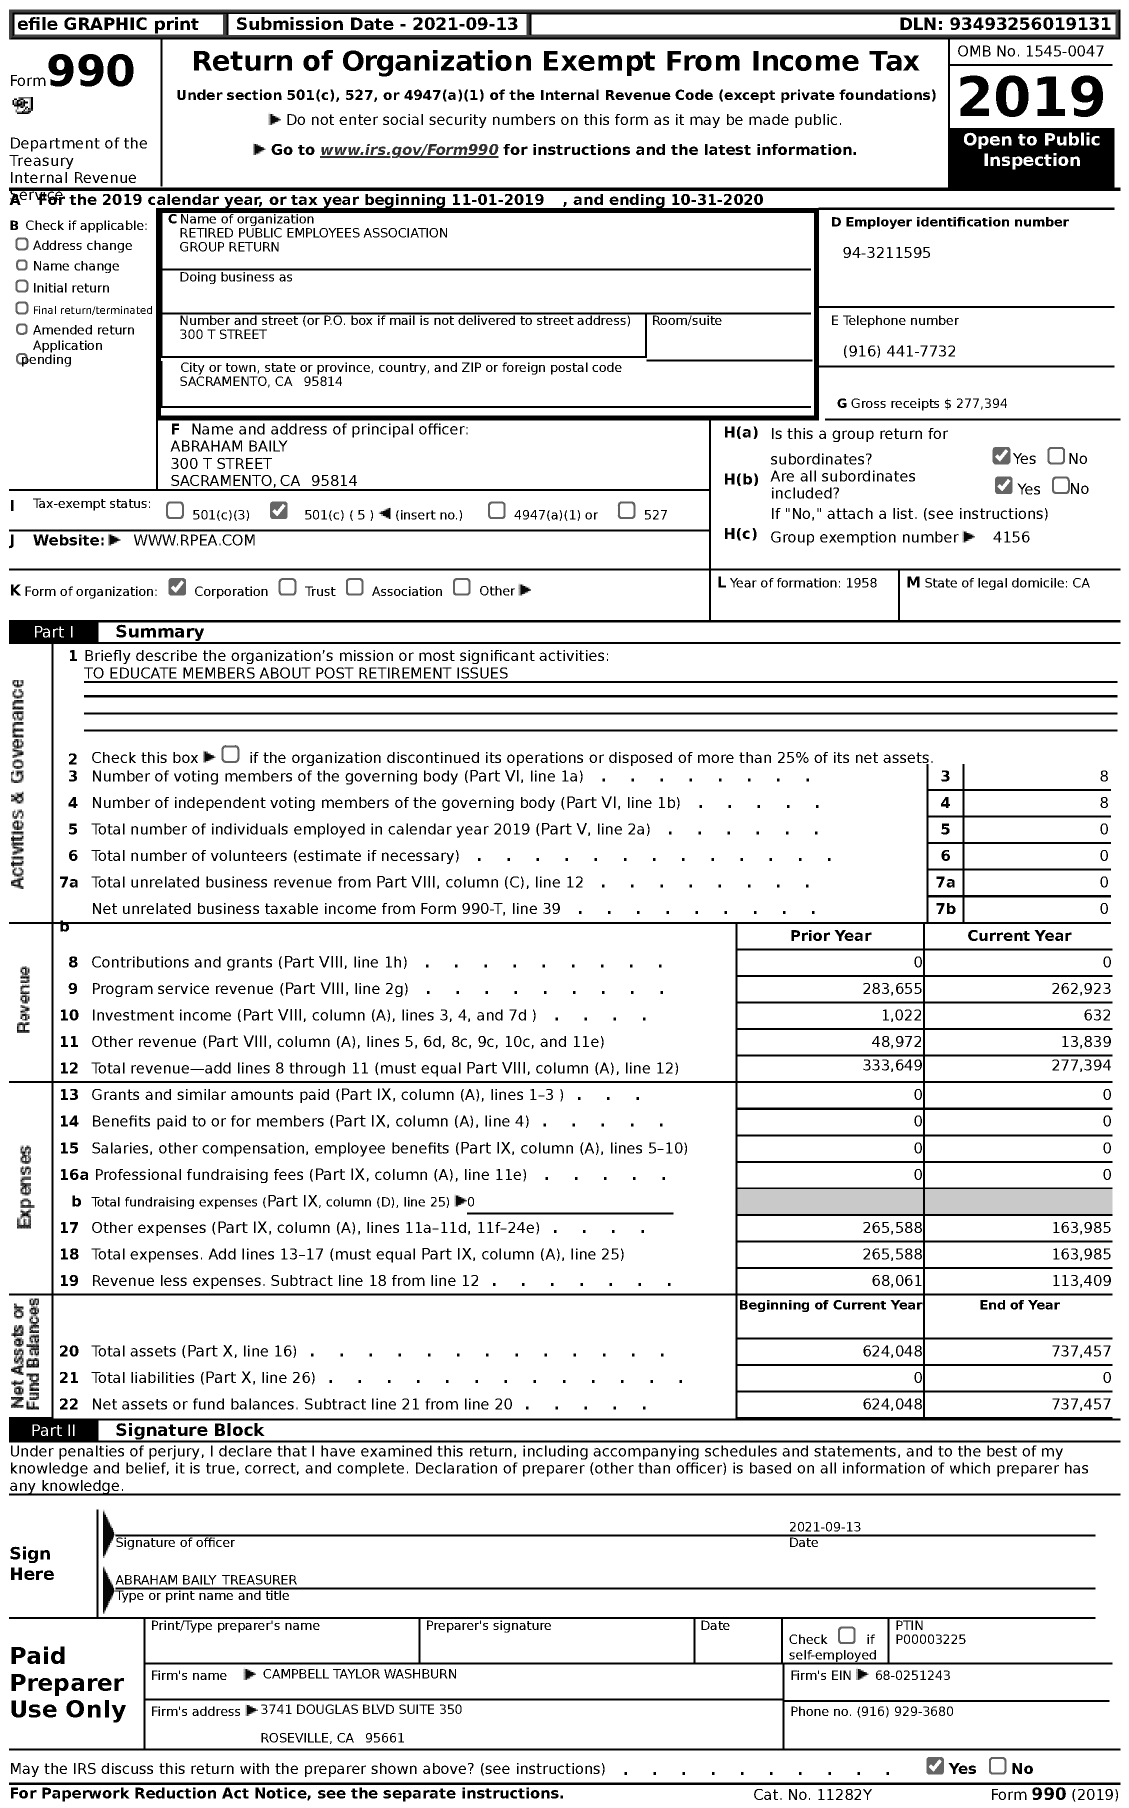 Image of first page of 2019 Form 990 for Retired Public Employees Association Group Return